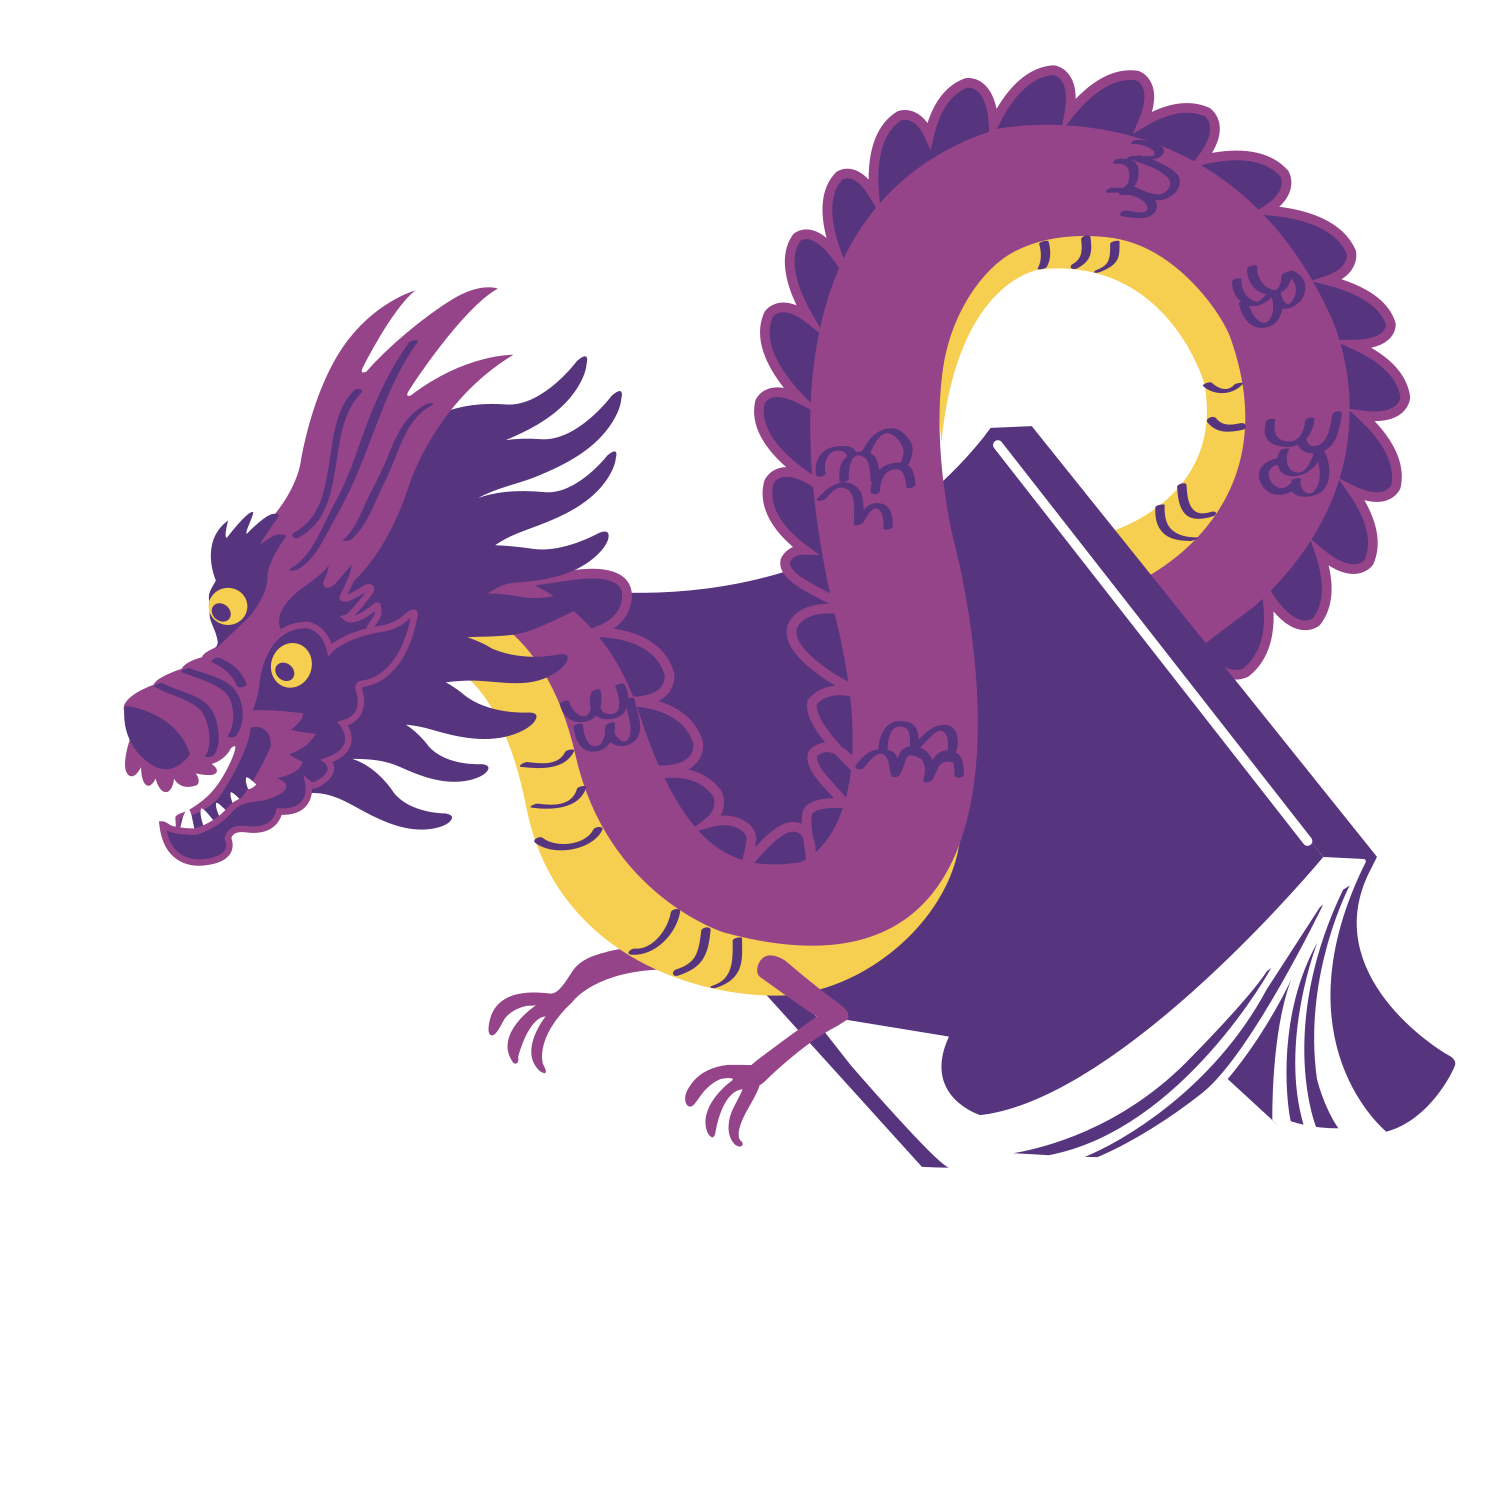 Illustration of a purple Chinese dragon emerging from a book with the words Imagine Your Story.